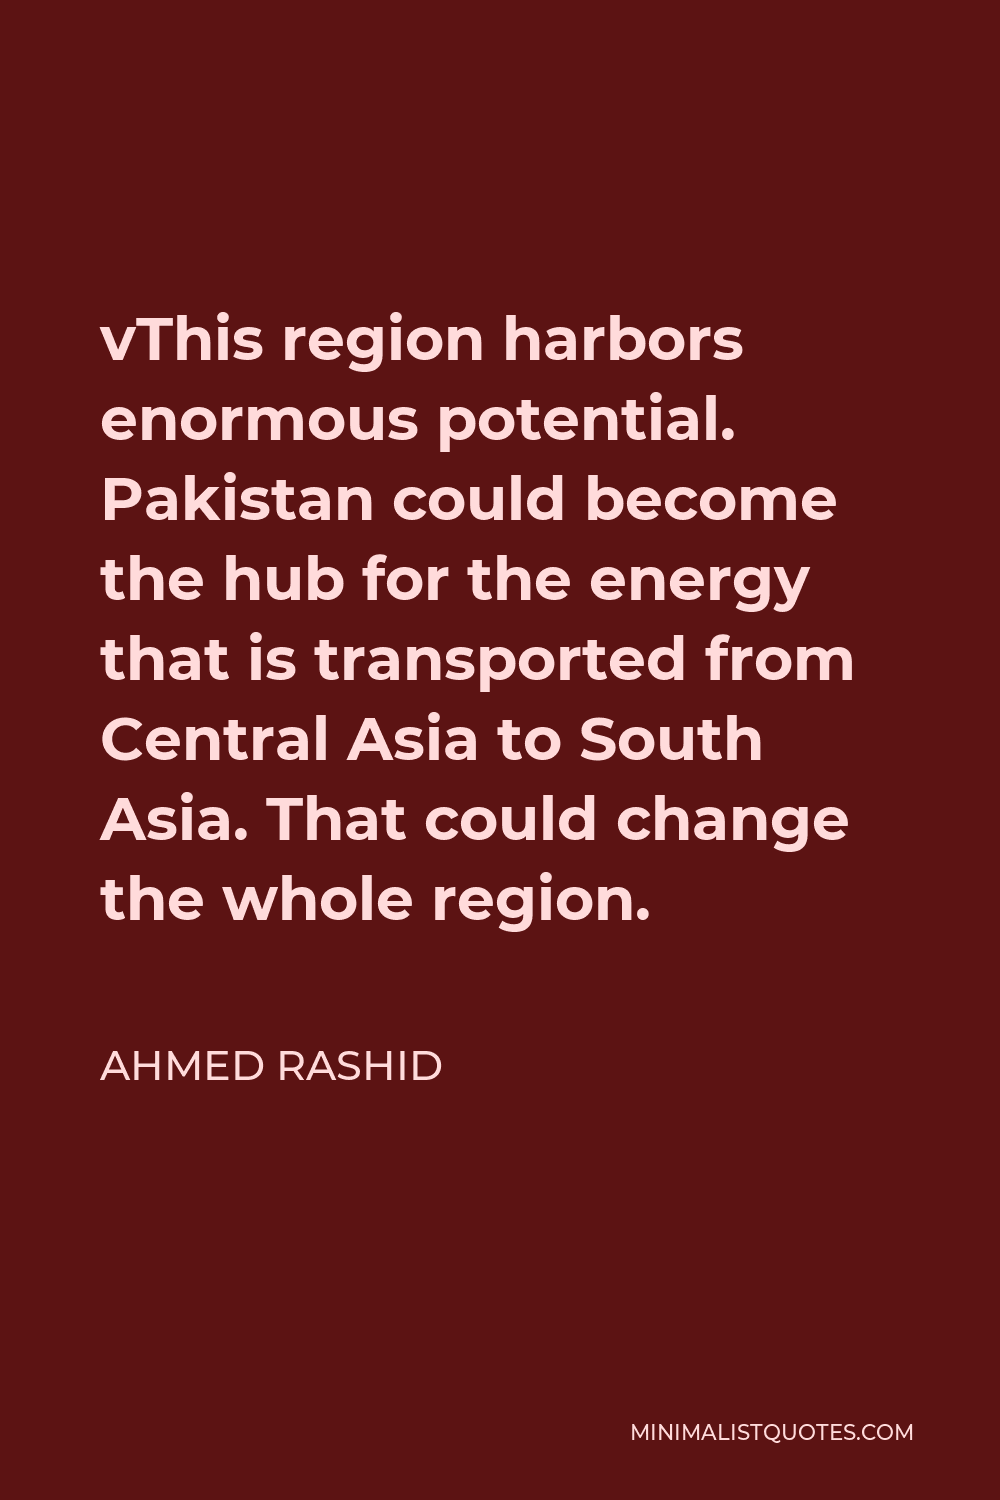 Ahmed Rashid Quote - vThis region harbors enormous potential. Pakistan could become the hub for the energy that is transported from Central Asia to South Asia. That could change the whole region.